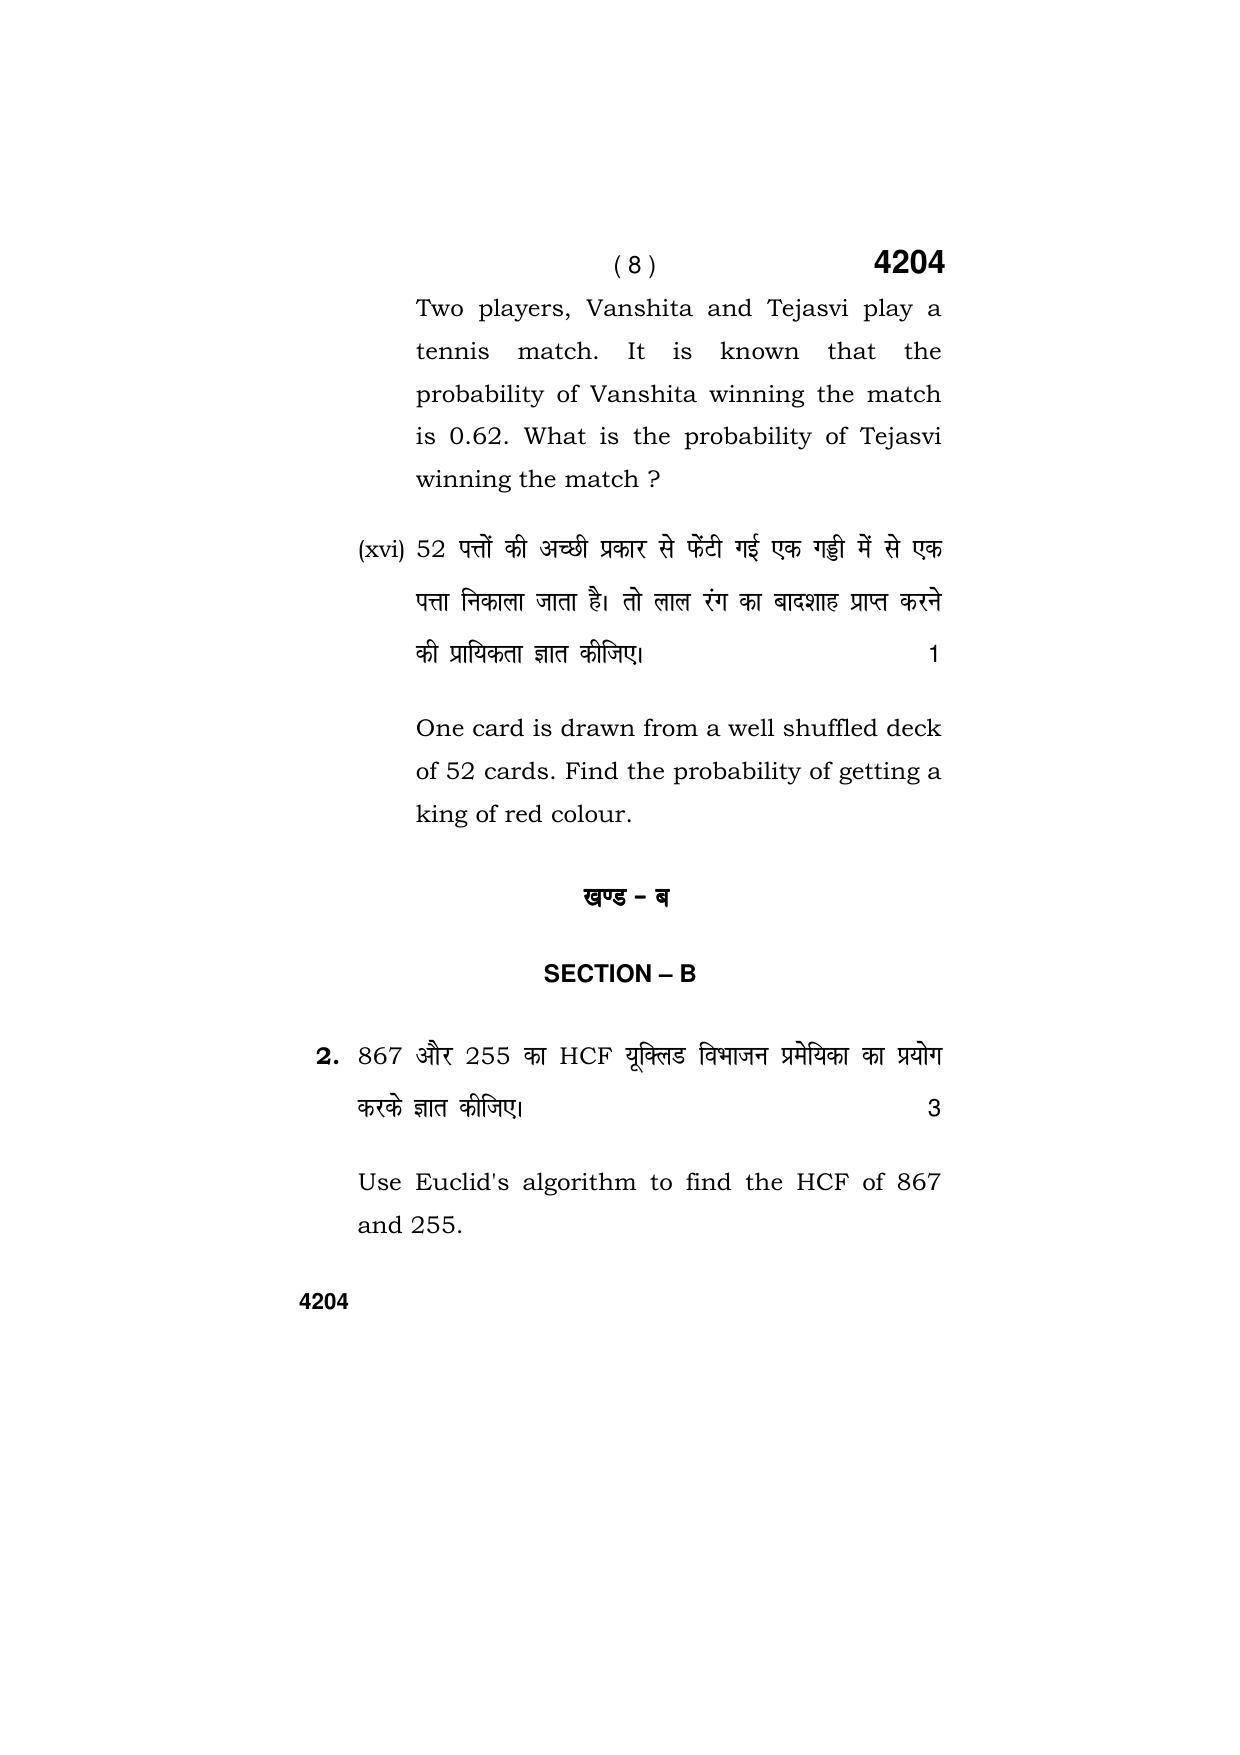 Haryana Board HBSE Class 10 Mathematics (Blind c) 2019 Question Paper - Page 8